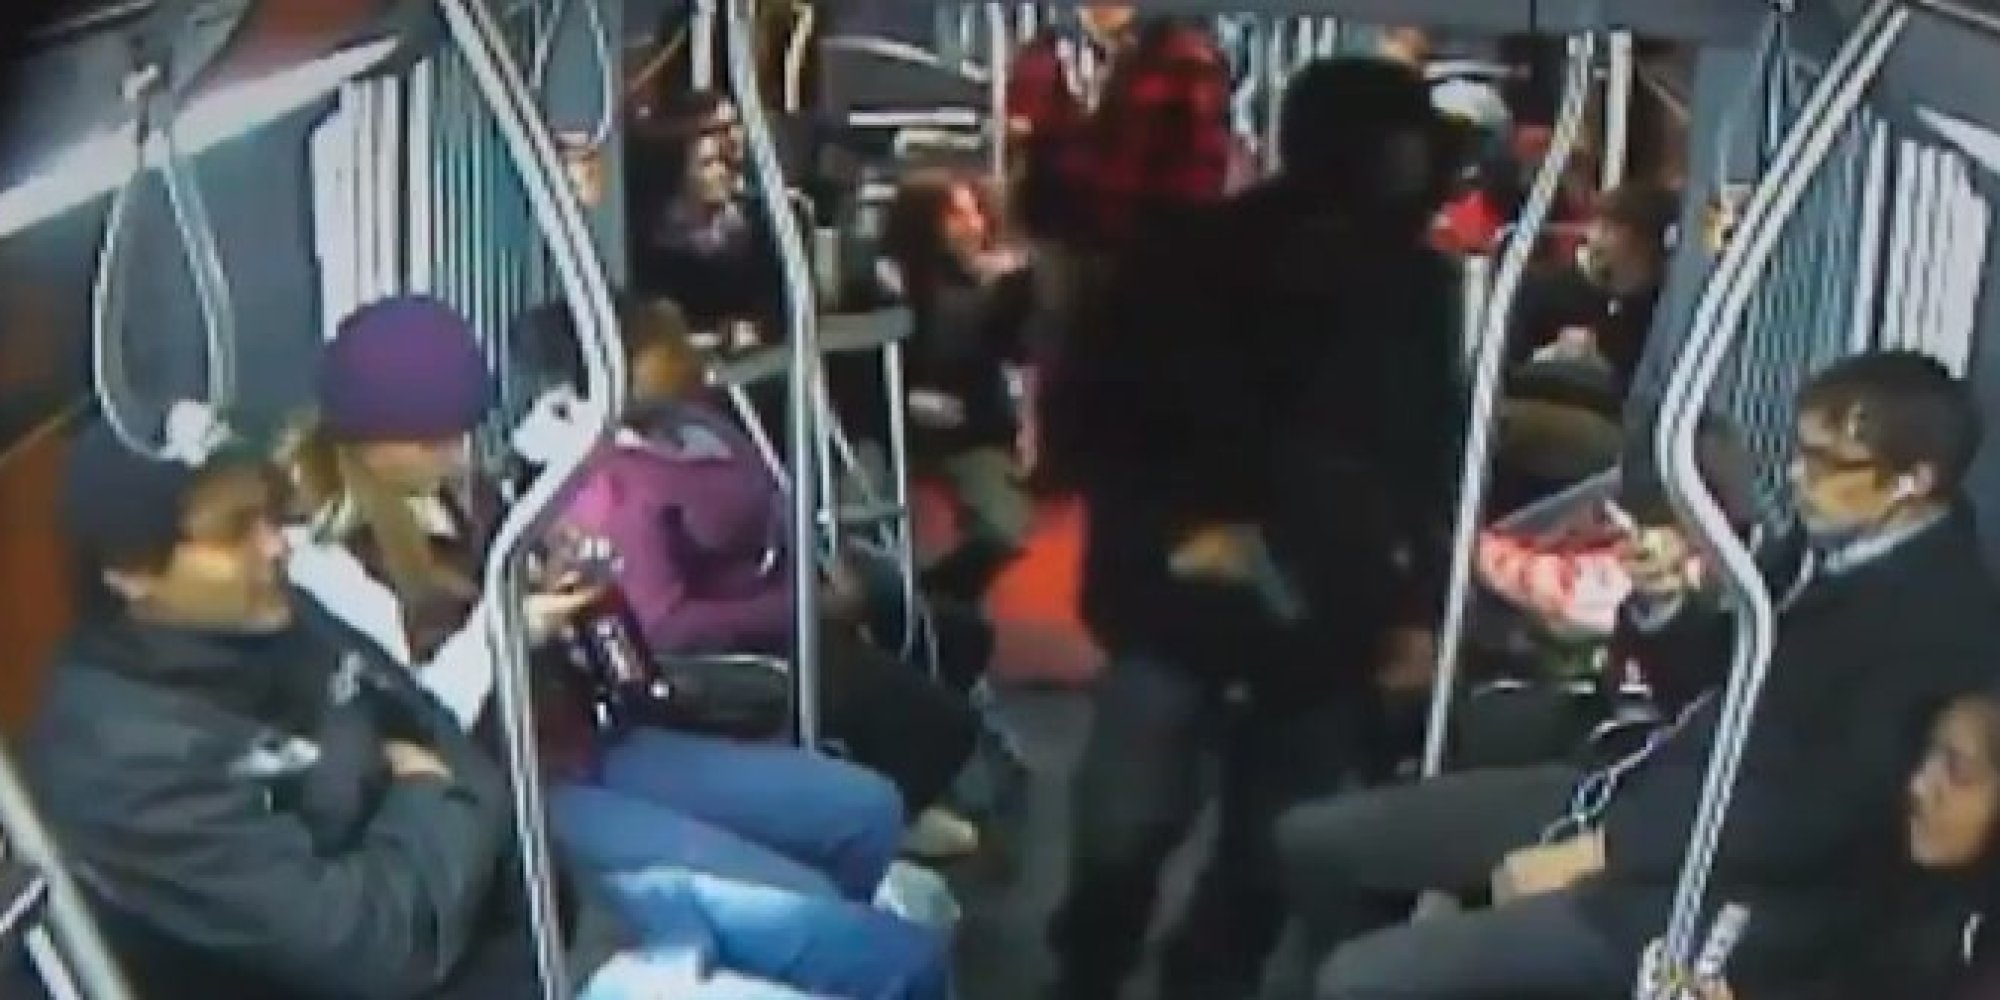 Bus Passengers Wrestle Armed Robber To The Ground In Striking 